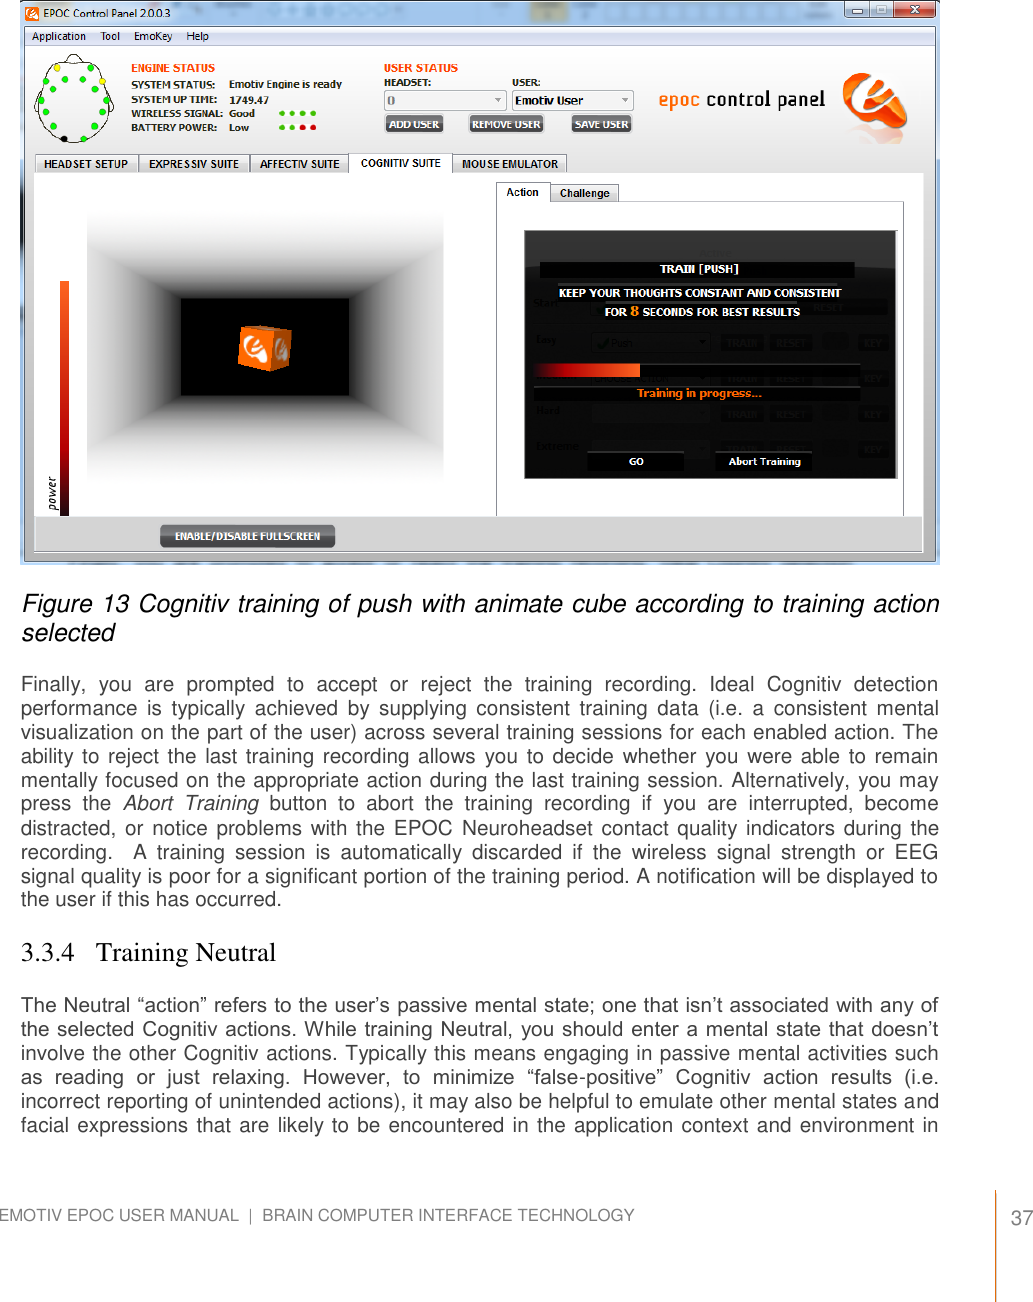   37 EMOTIV EPOC USER MANUAL  |  BRAIN COMPUTER INTERFACE TECHNOLOGY      Figure 13 Cognitiv training of push with animate cube according to training action selected Finally,  you  are  prompted  to  accept  or  reject  the  training  recording.  Ideal  Cognitiv  detection performance  is  typically  achieved  by  supplying  consistent  training  data  (i.e.  a  consistent  mental visualization on the part of the user) across several training sessions for each enabled action. The ability to reject the  last training recording allows  you to decide whether  you were able  to remain mentally focused on the appropriate action during the last training session. Alternatively, you may press  the  Abort  Training  button  to  abort  the  training  recording  if  you  are  interrupted,  become distracted, or notice  problems with the EPOC  Neuroheadset contact quality indicators during the recording.    A  training  session  is  automatically  discarded  if  the  wireless  signal  strength  or  EEG signal quality is poor for a significant portion of the training period. A notification will be displayed to the user if this has occurred. 3.3.4   Training Neutral The Neutral “action” refers to the user’s passive mental state; one that isn’t associated with any of the selected Cognitiv actions. While training Neutral, you should enter a mental state that doesn’t involve the other Cognitiv actions. Typically this means engaging in passive mental activities such as  reading  or  just  relaxing.  However,  to  minimize  “false-positive”  Cognitiv  action  results  (i.e. incorrect reporting of unintended actions), it may also be helpful to emulate other mental states and facial expressions that are likely to be encountered in the application context and environment in 